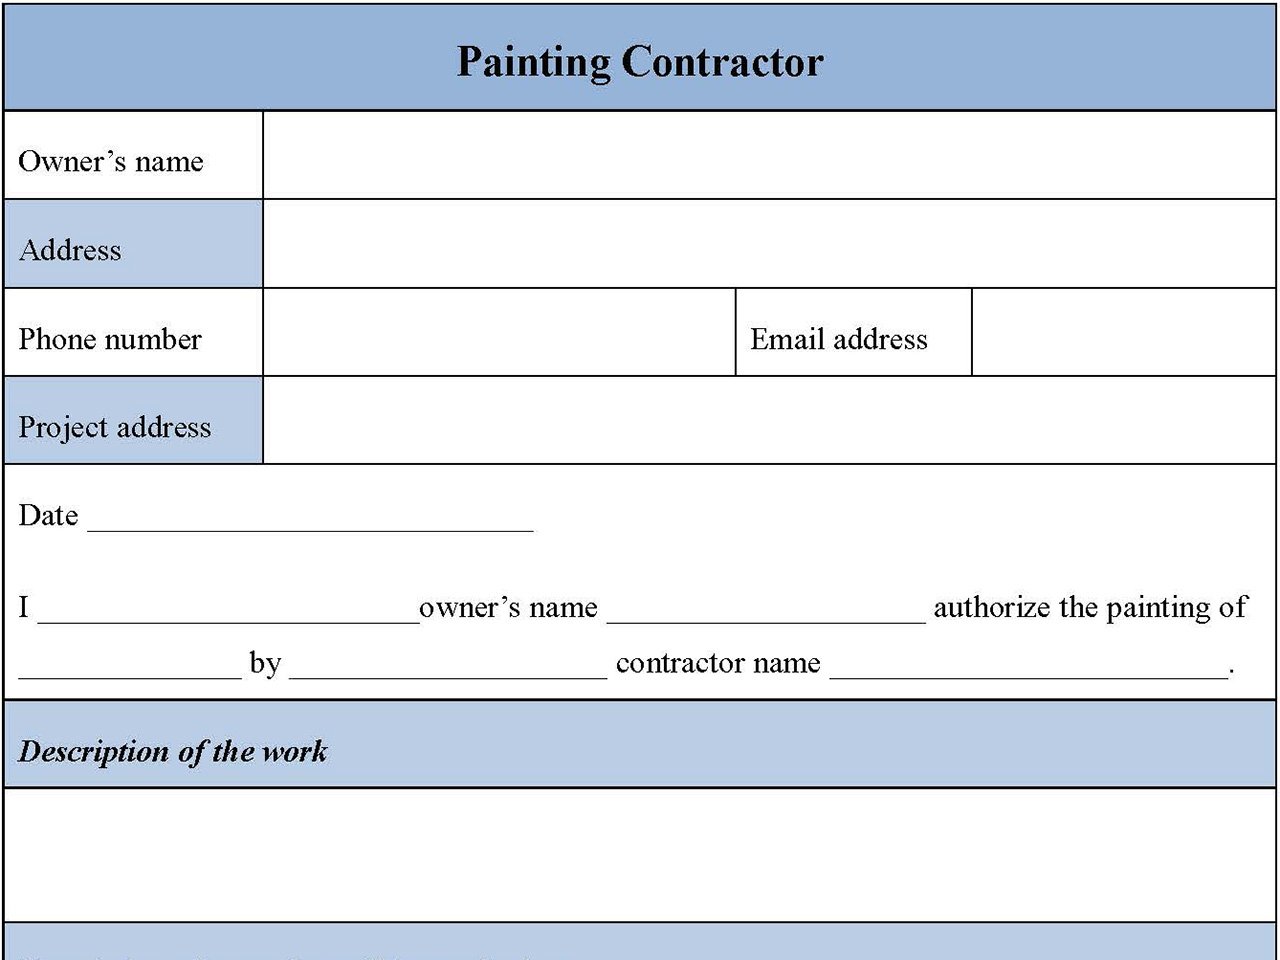 Painting Contractor Form